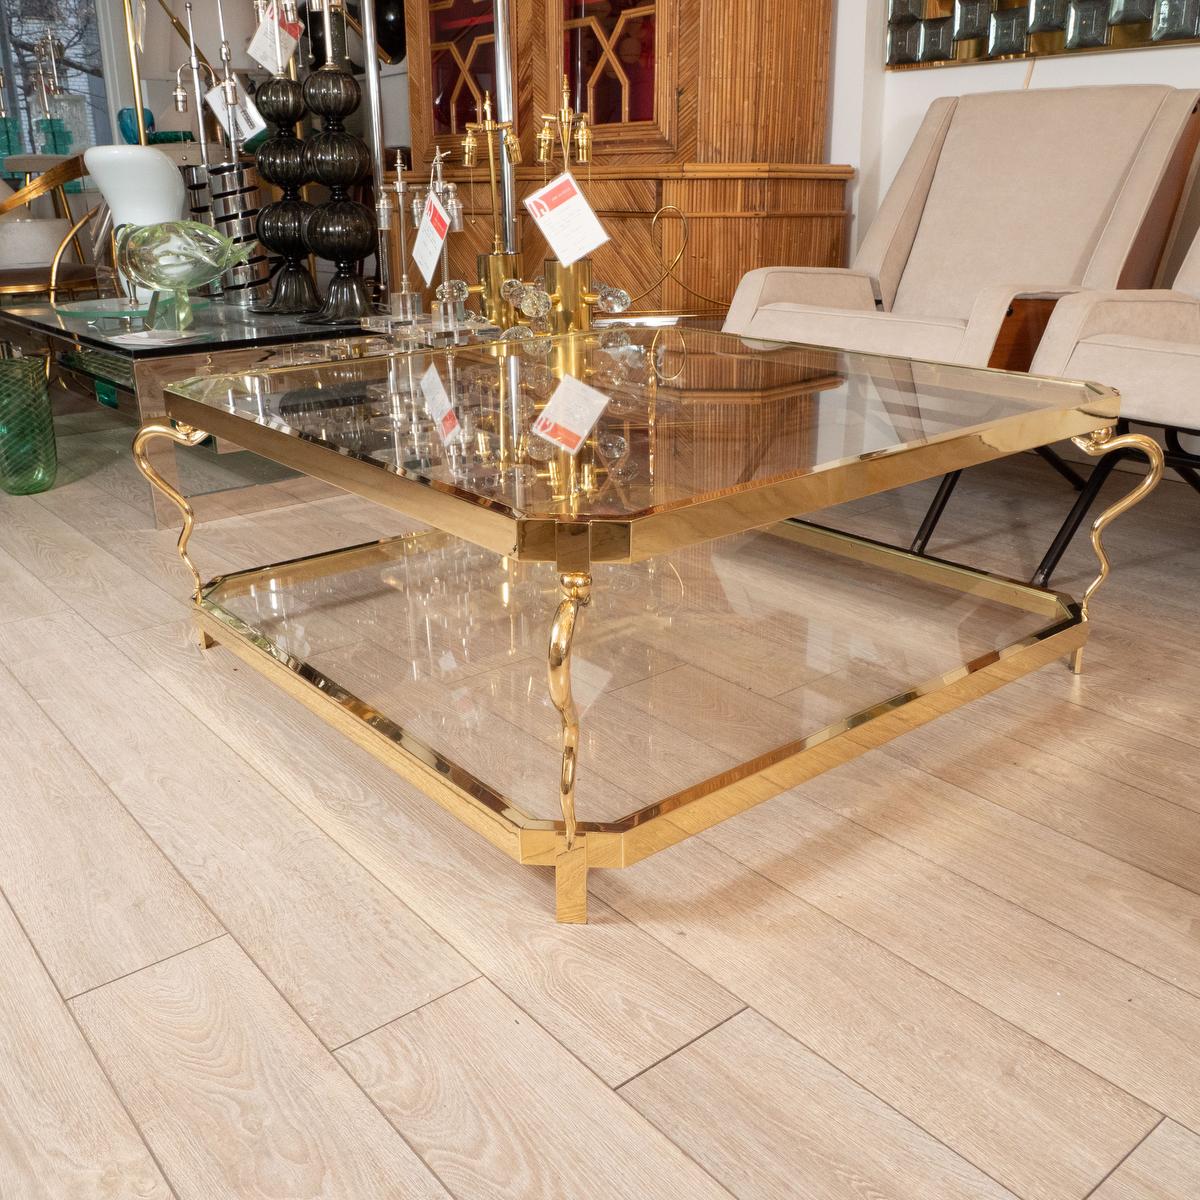 Two-tier brass coffee table with snake form supports at corners.

